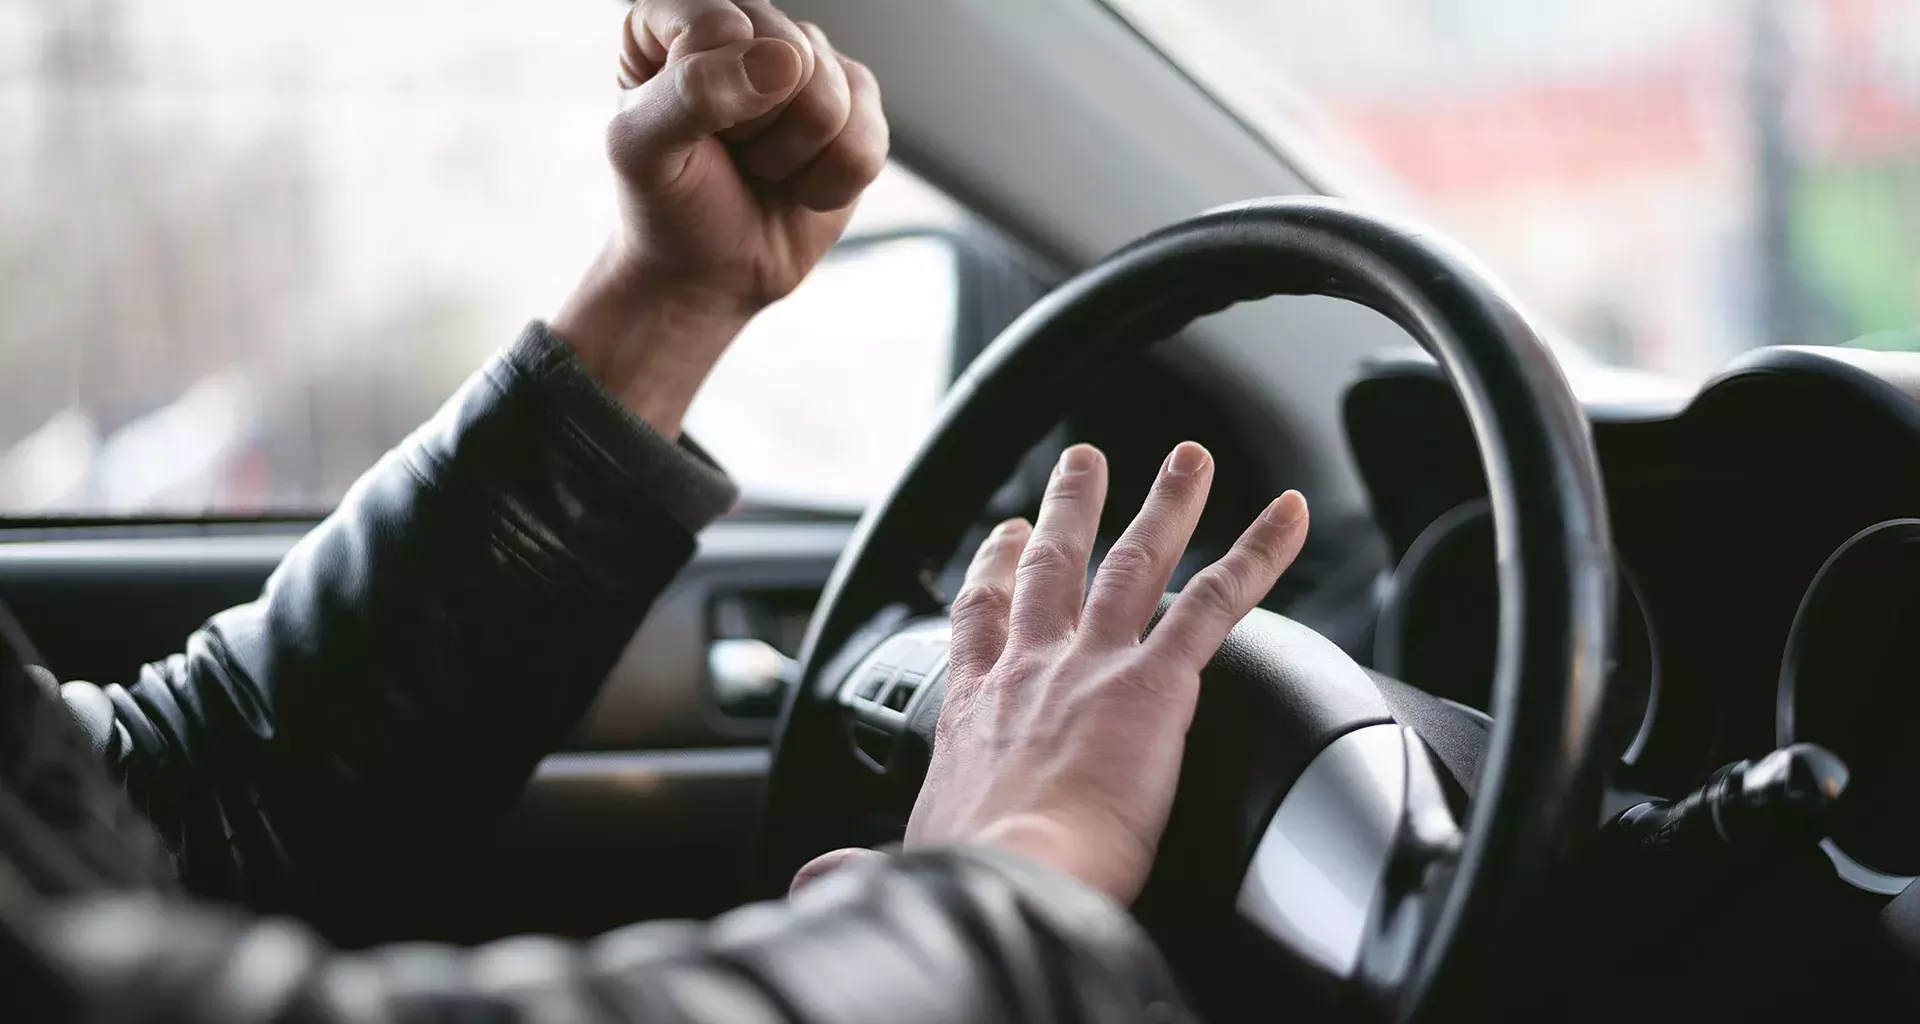 Stop! Tec researchers seek to slow down aggressive drivers